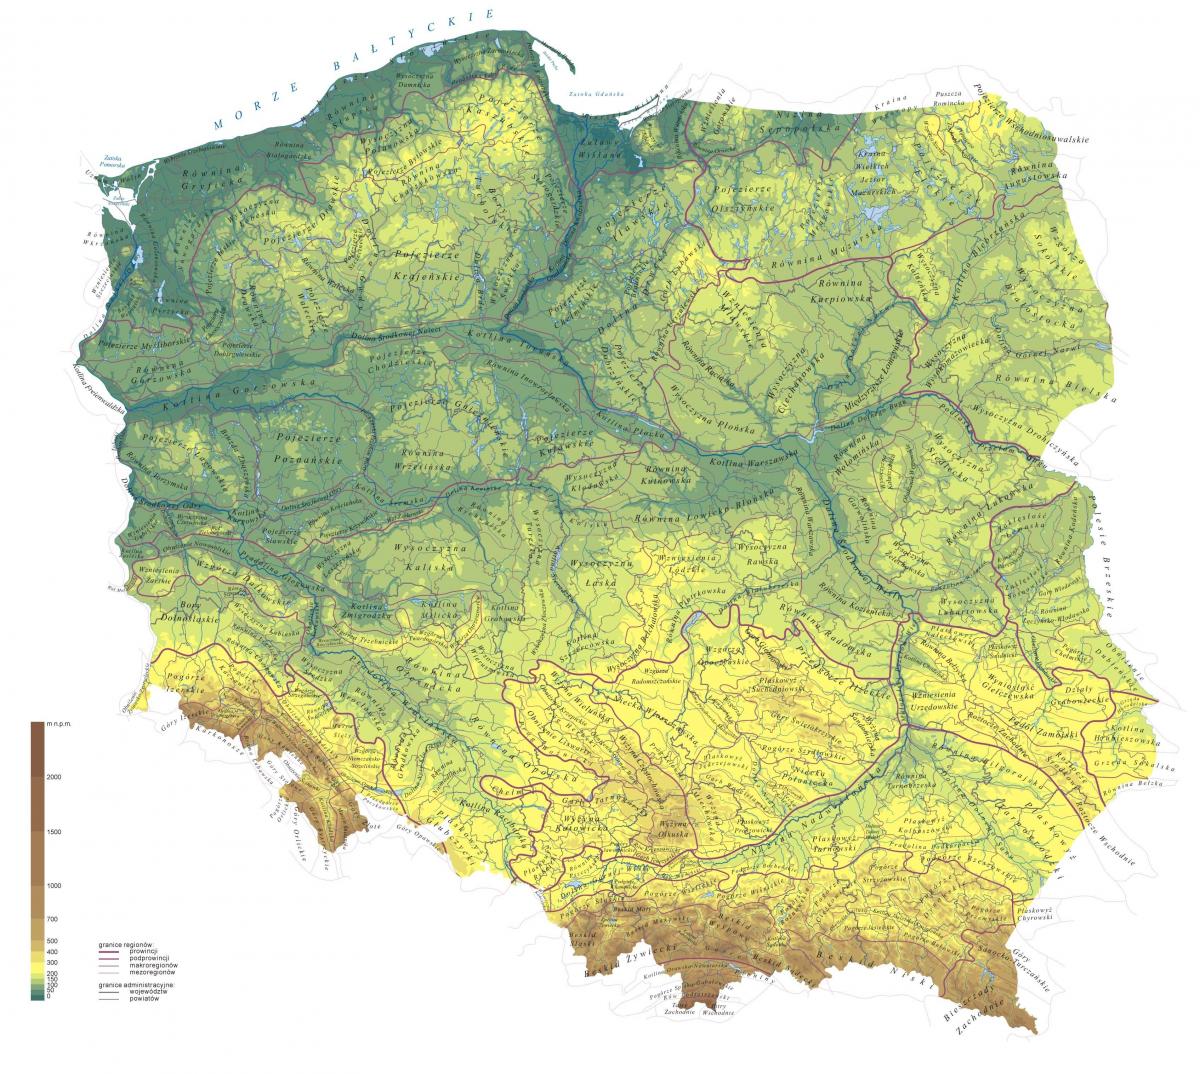 Topographical map of Poland